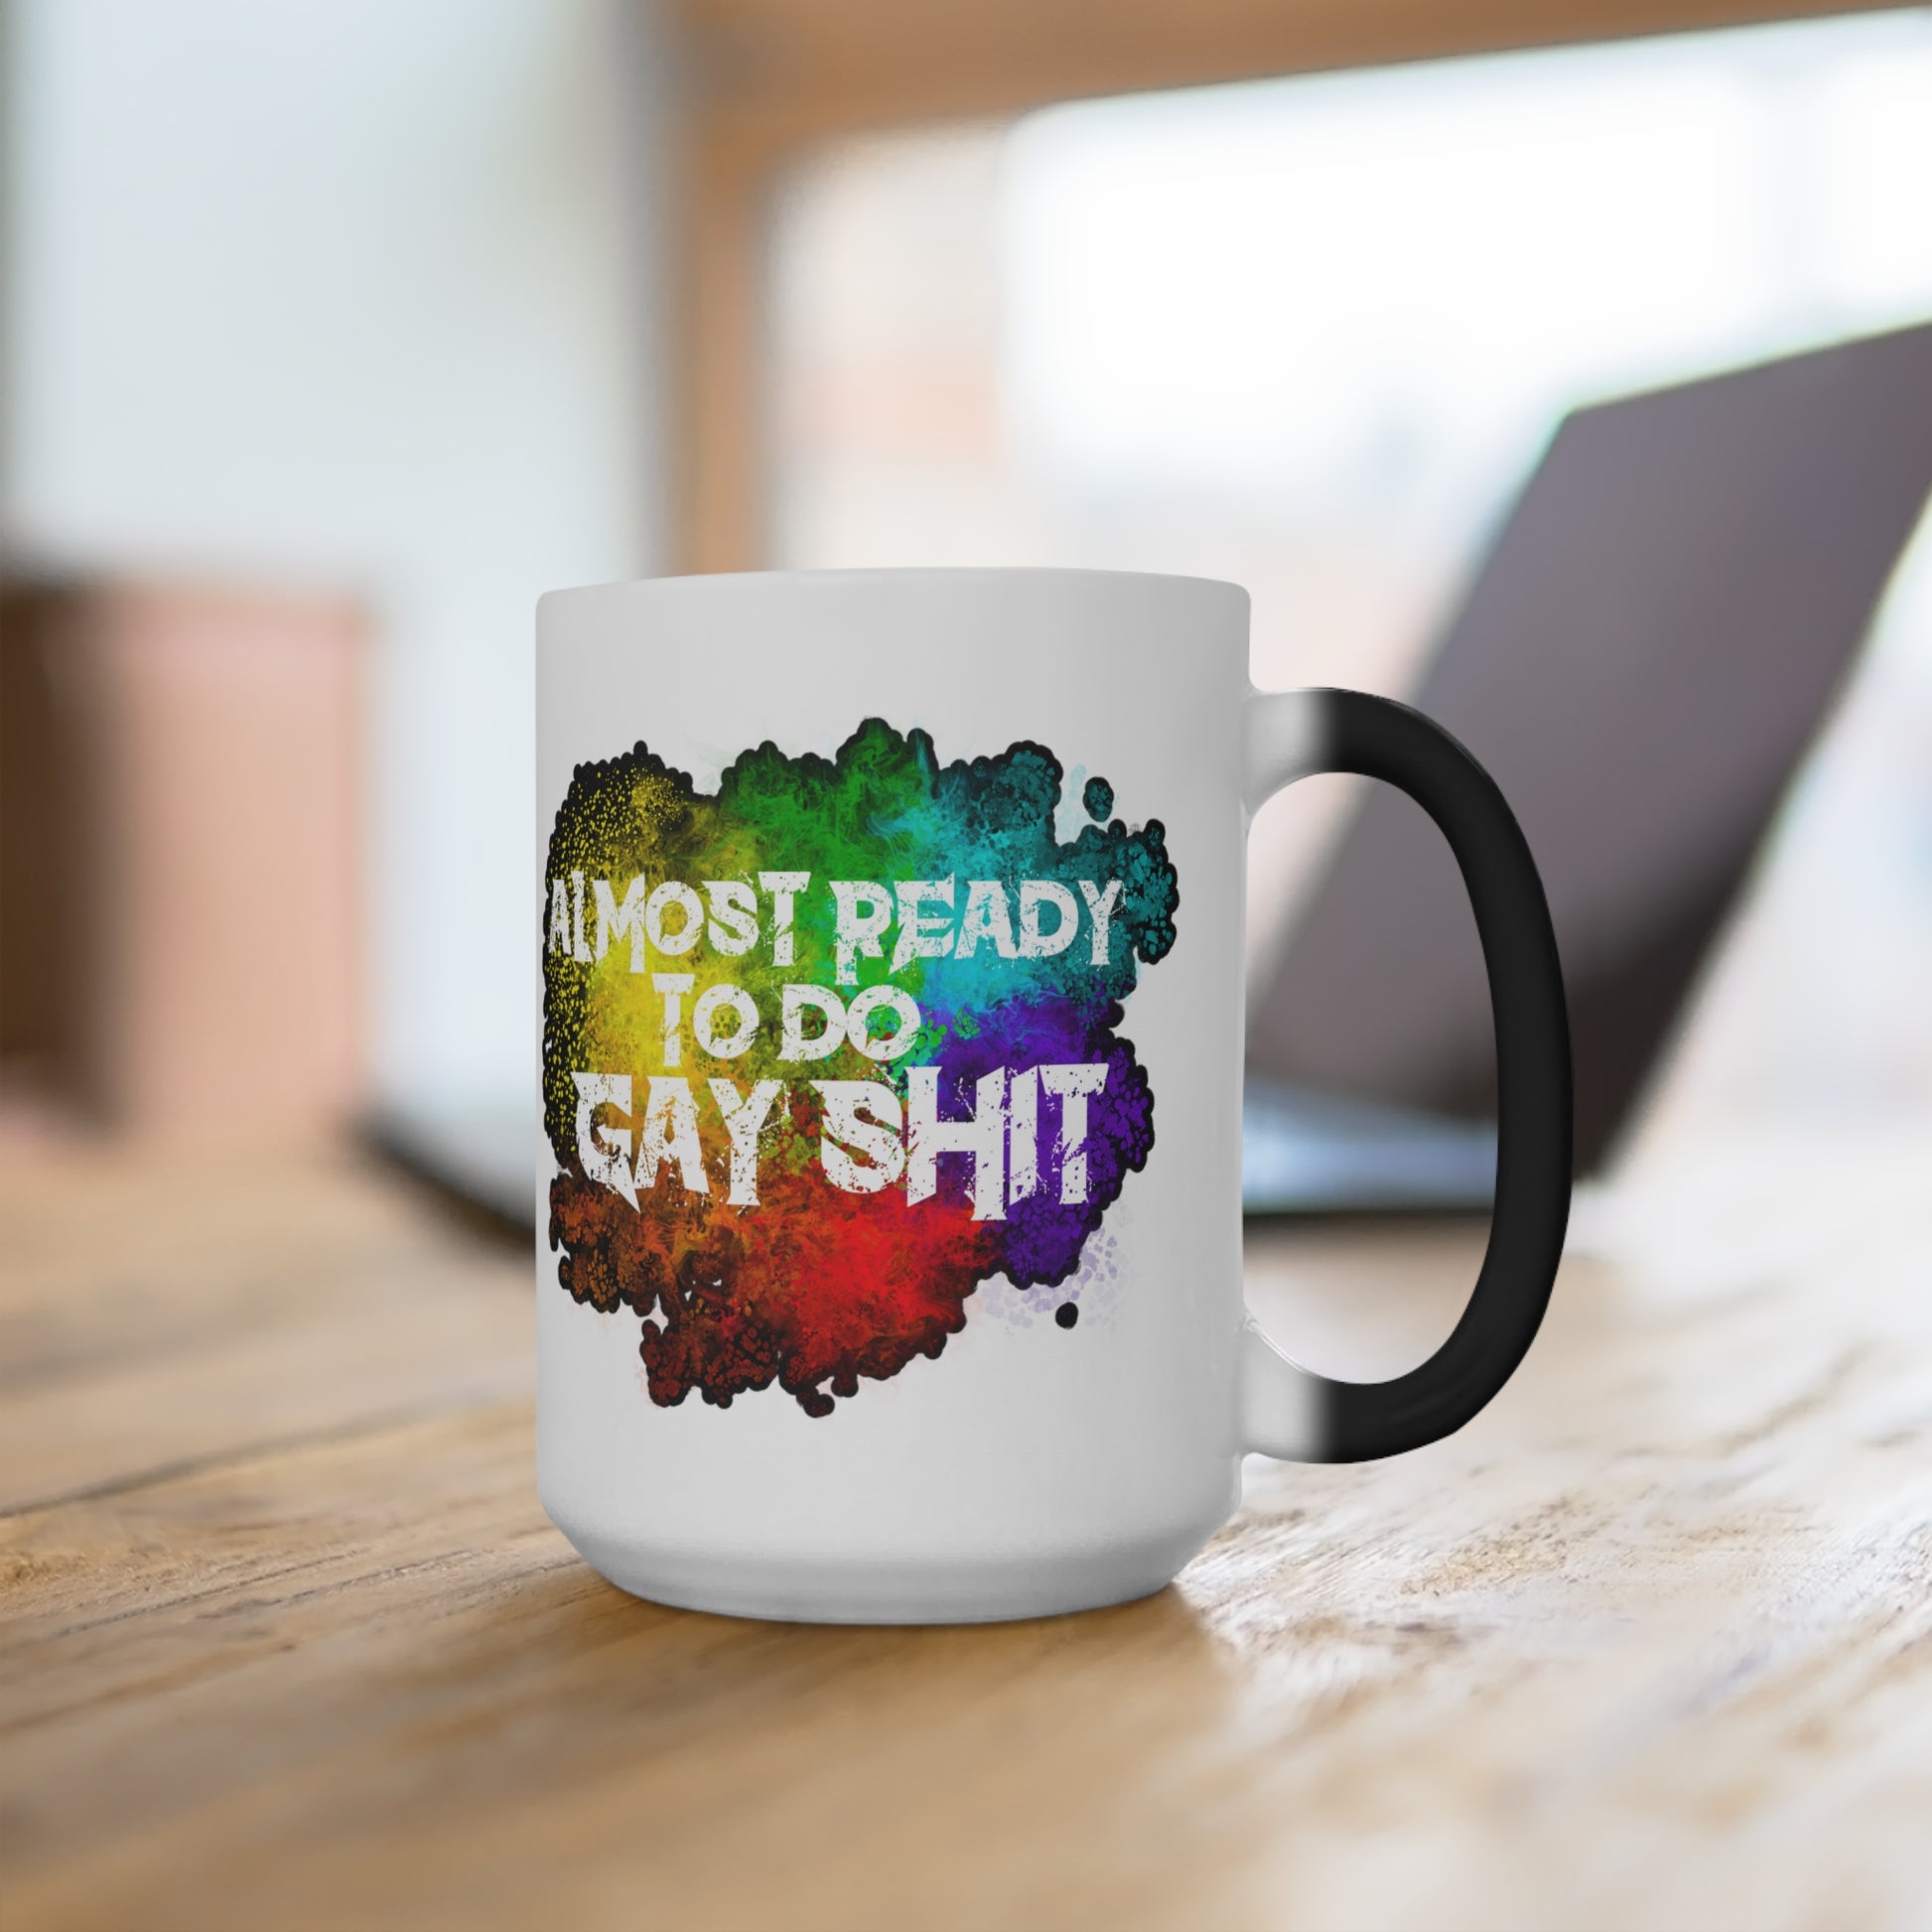 Add a touch of pride to your mornings with the 'Almost Ready To Do Gay Shit' 11oz color-changing mug from Moody Booty Apparel. This LGBTQ-themed coffee mug brings joy as it transforms colors with the warmth of your beverage. Start the day with a vibrant reminder of inclusivity.